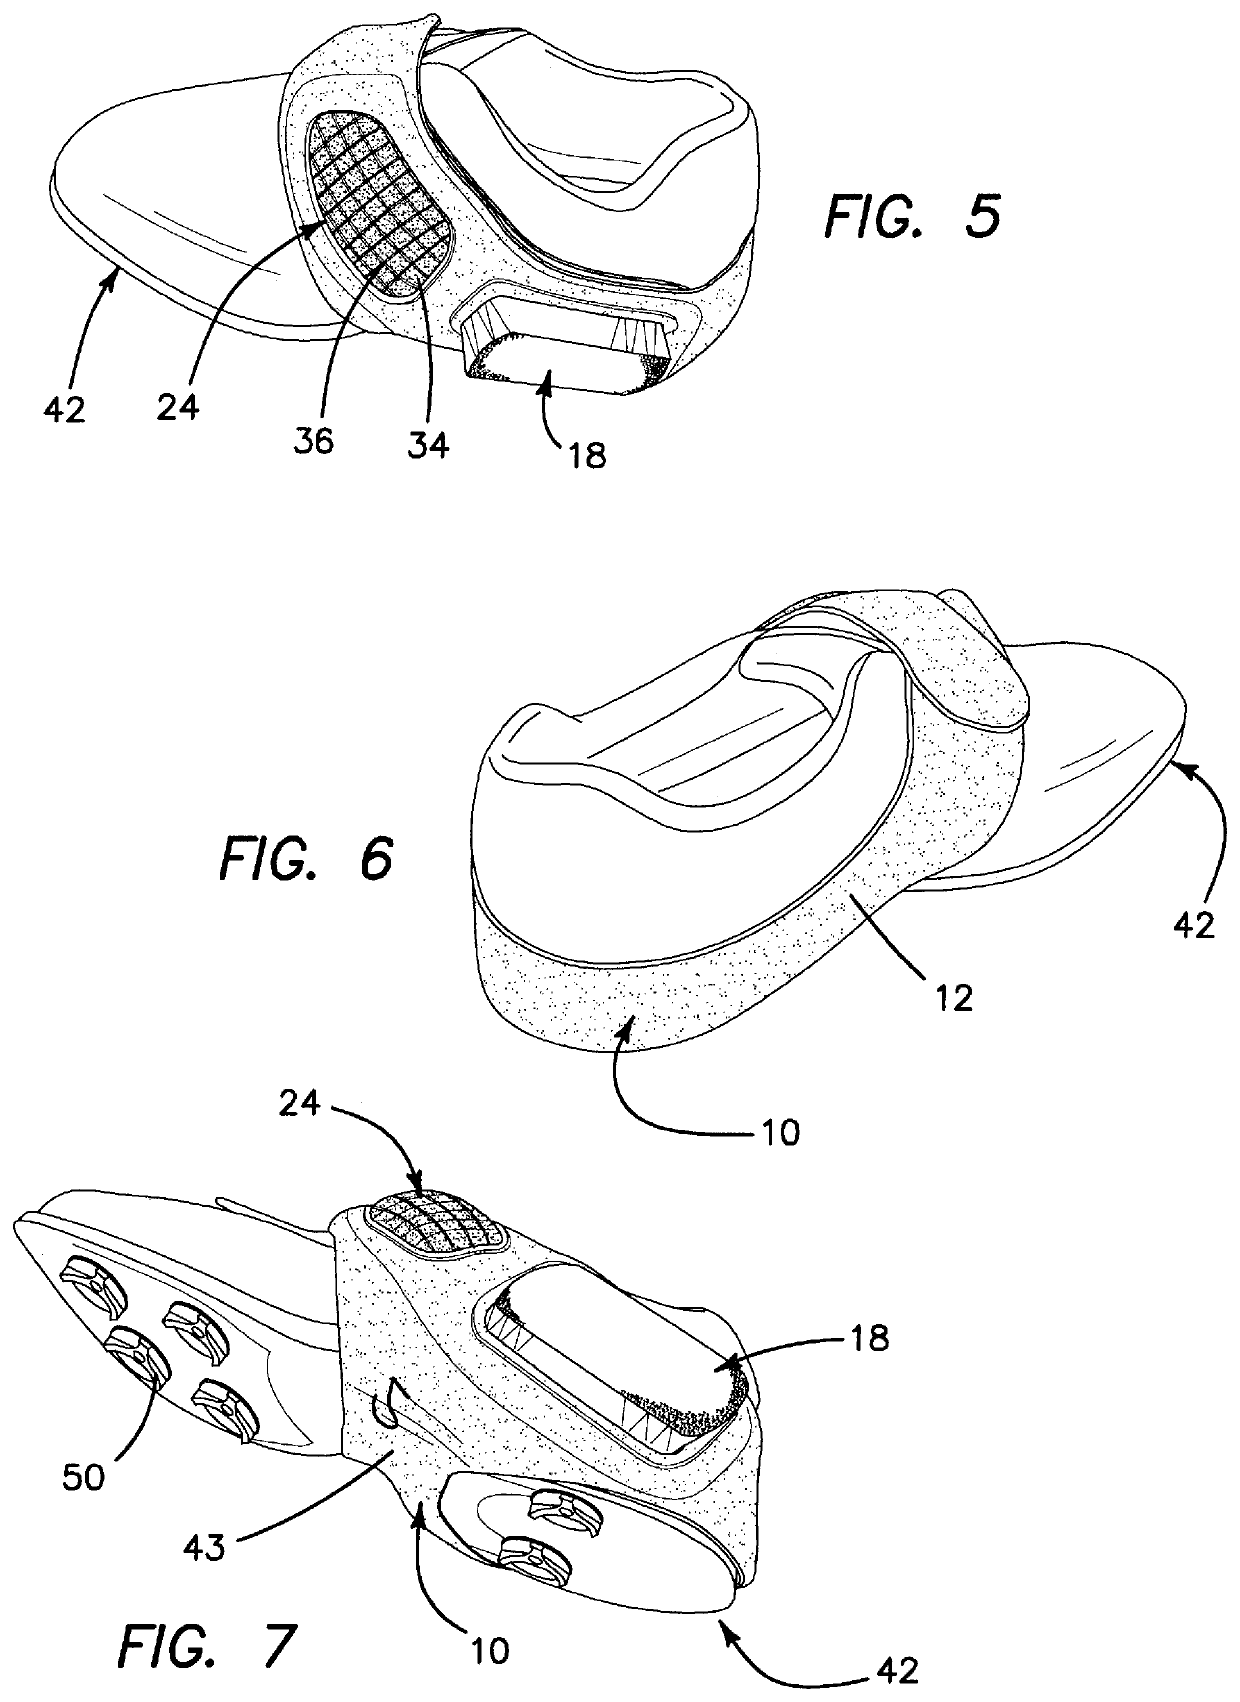 Footwear-based cleaning systems and methods